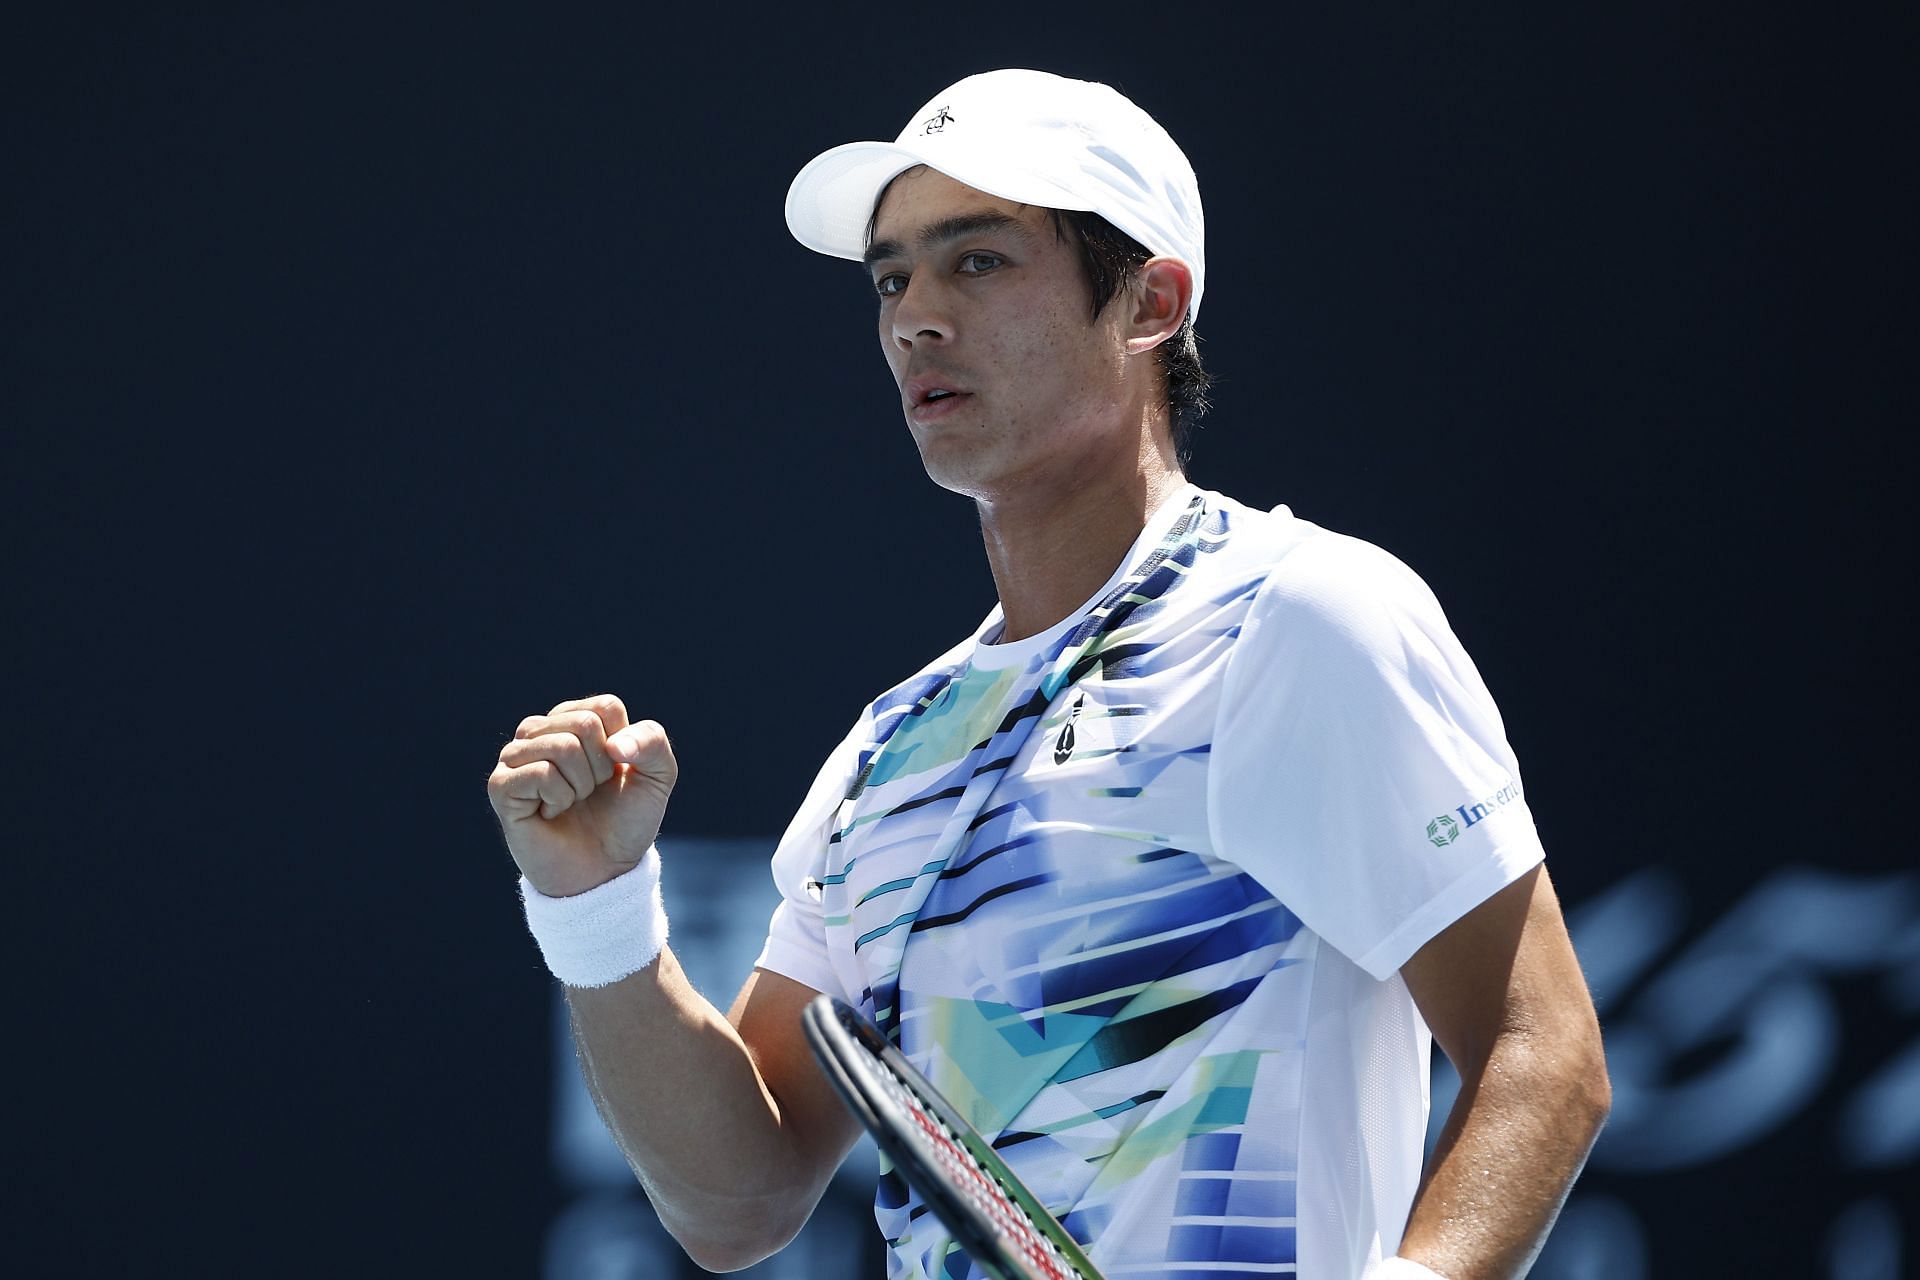 Rafael Nadals next match Opponent, venue, live streaming, TV channel and schedule Australian Open 2023, Round 2